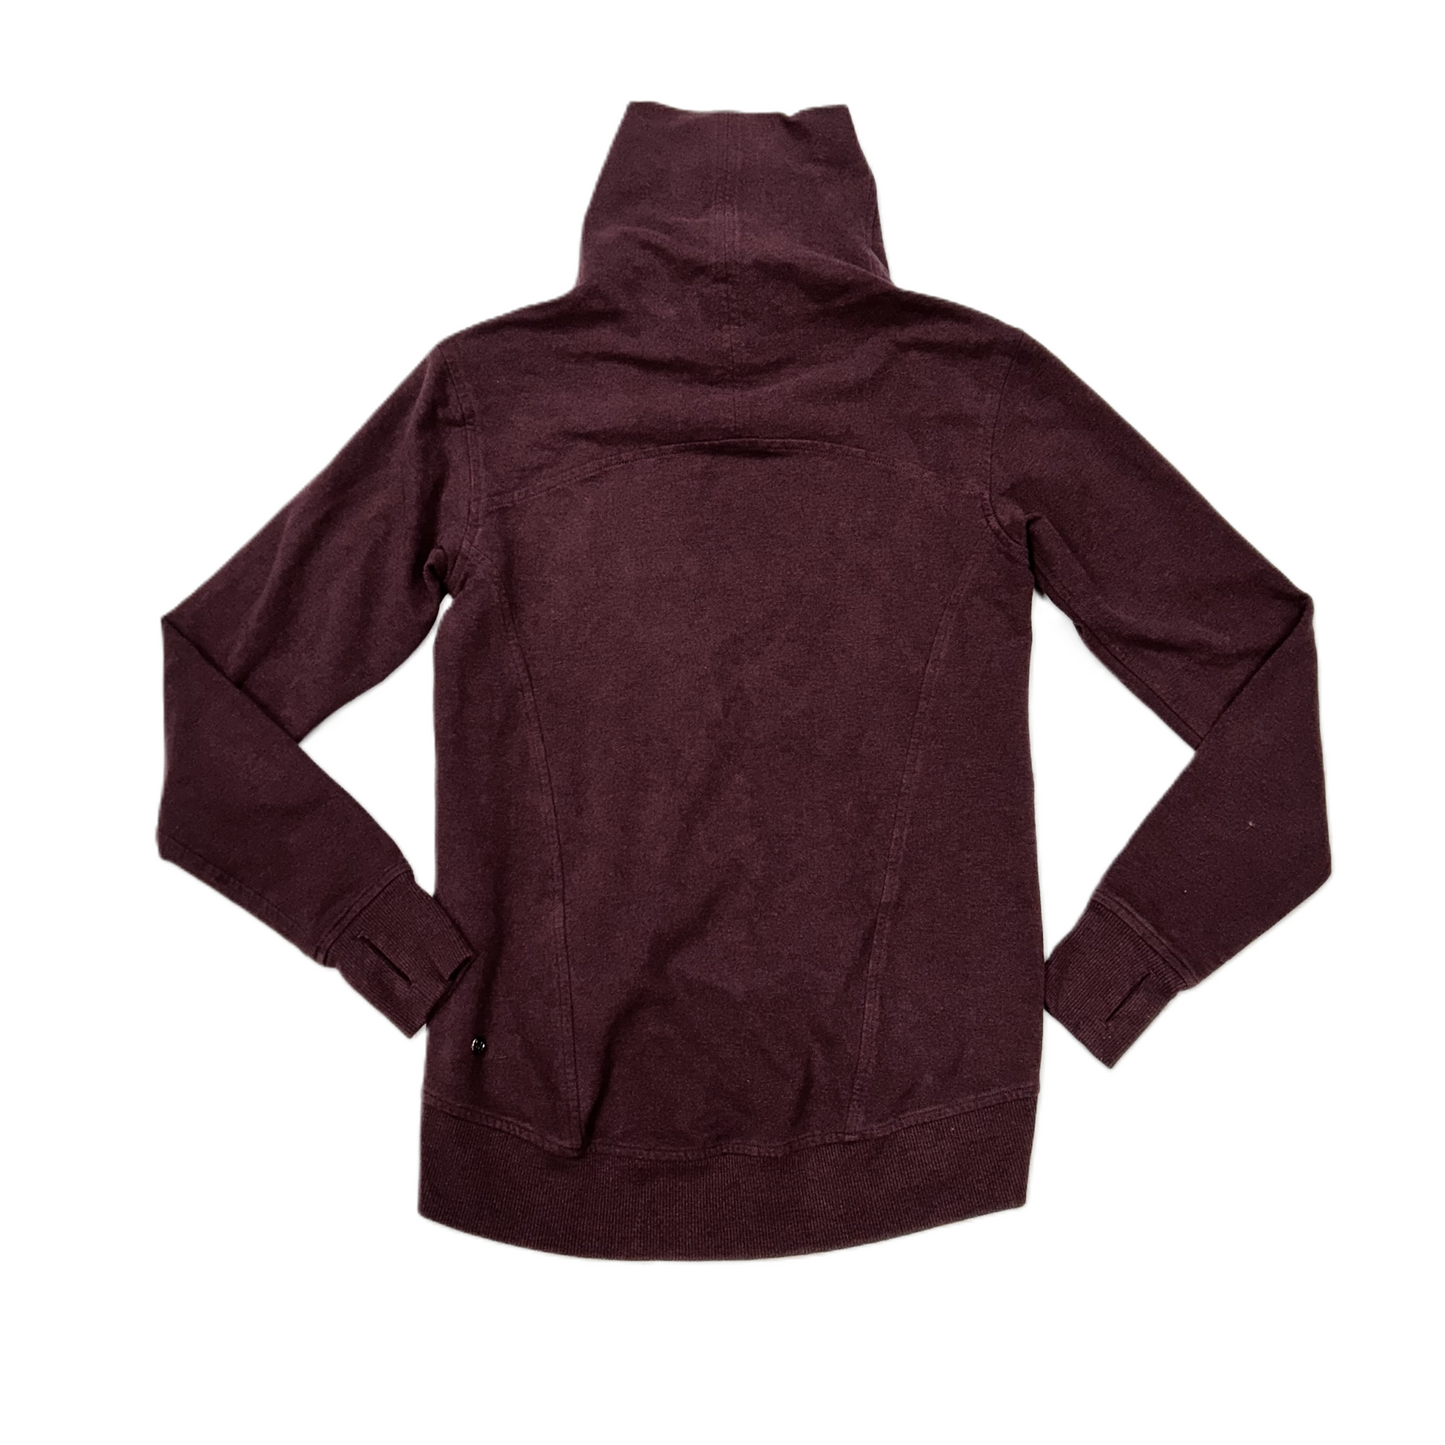 Purple Athletic Top Long Sleeve Collar By Lululemon, Size: Xs